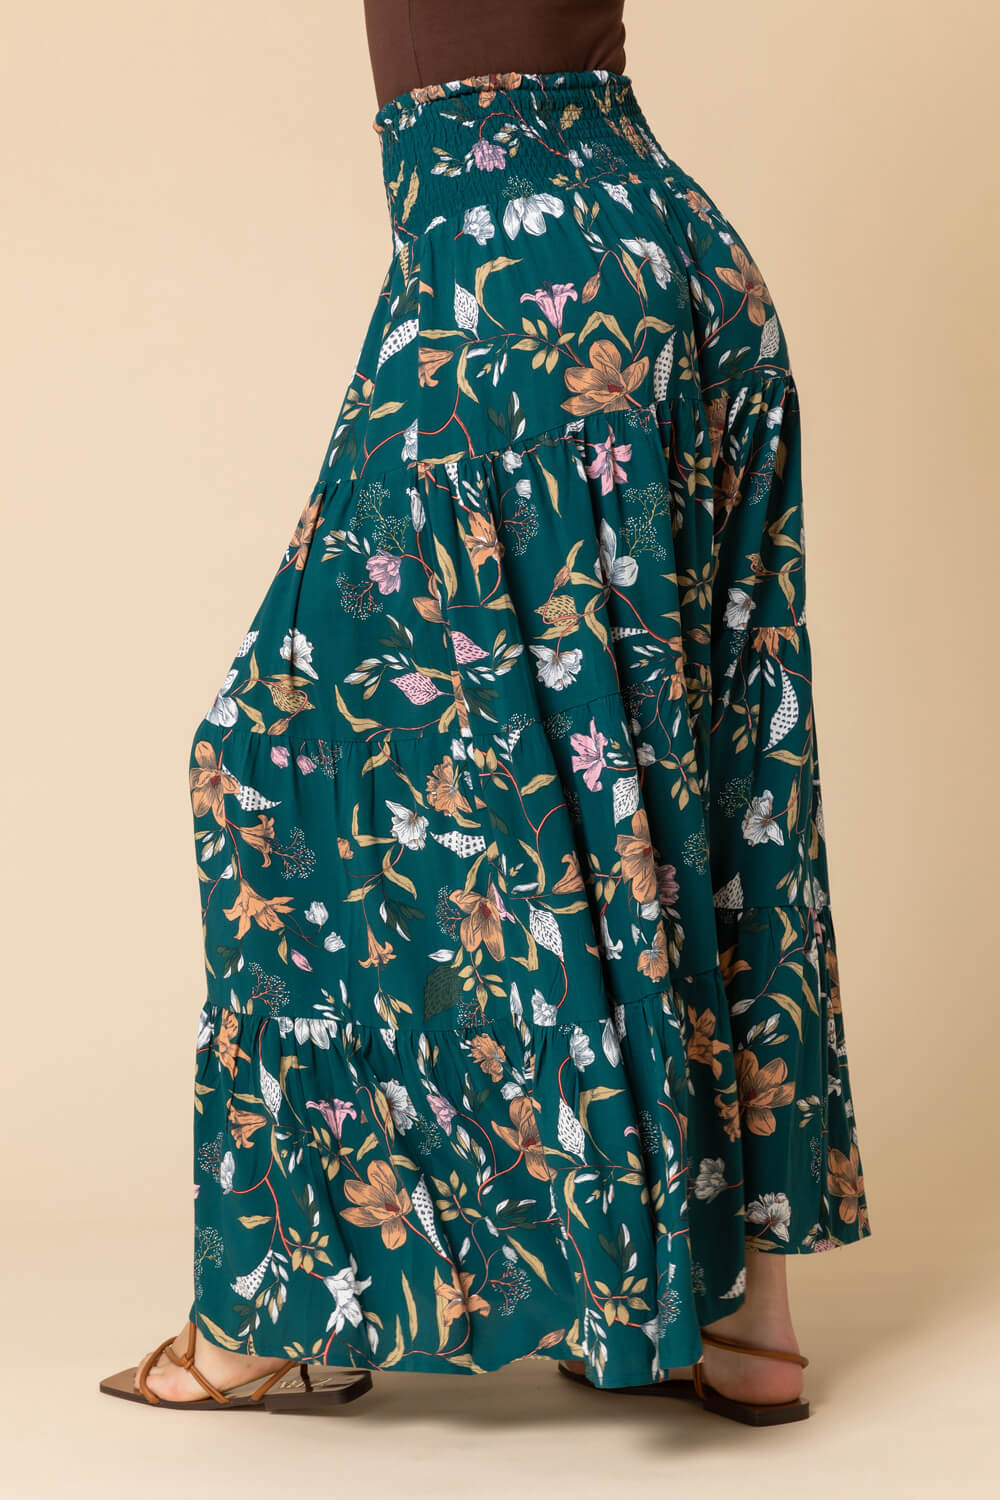 Teal Floral Shirred Waist Maxi Skirt, Image 2 of 4